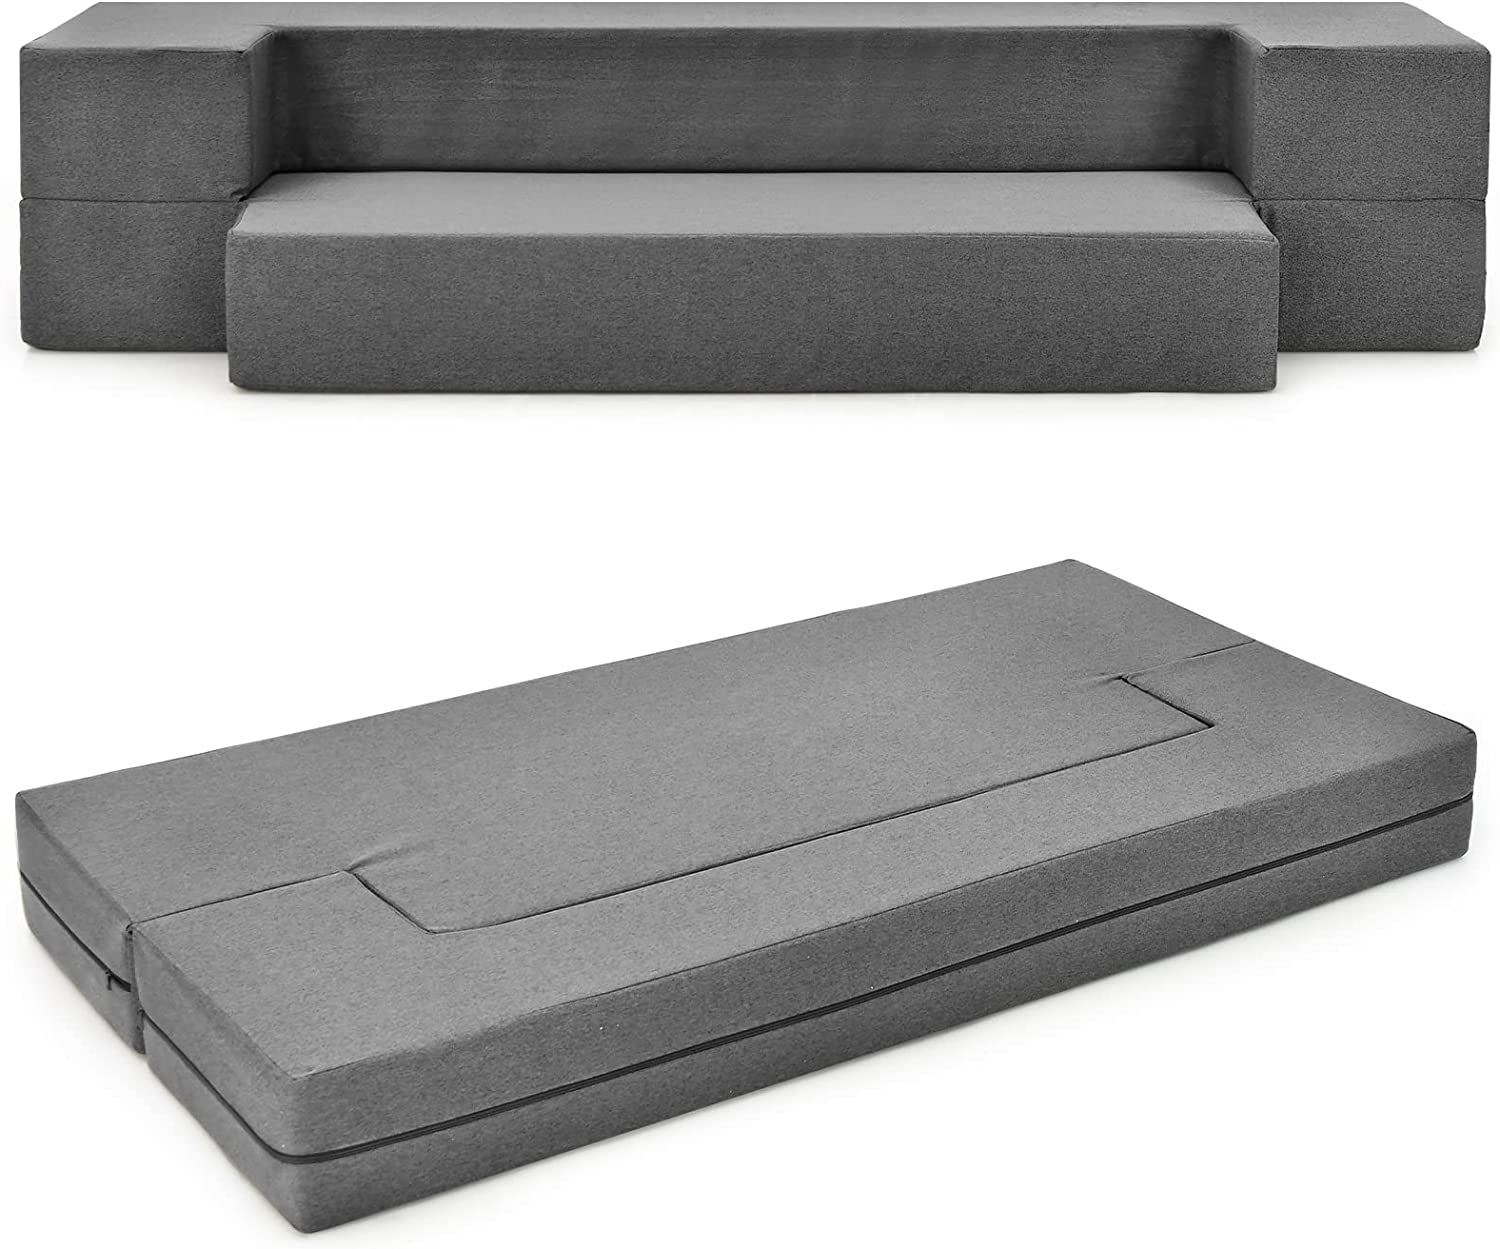 Giantex 8 Inch Folding Sofa Bed Couch